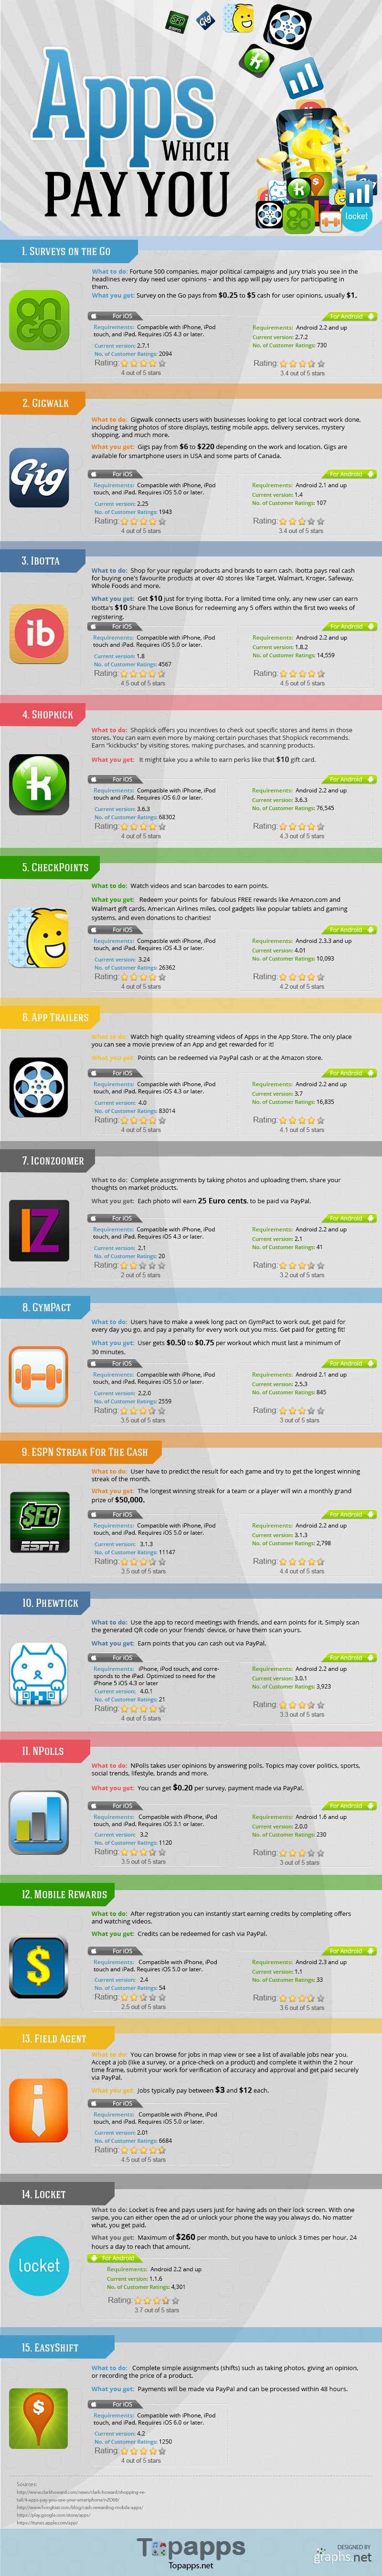 15 iPhone Apps That Pay You For Using Them [Infographic]